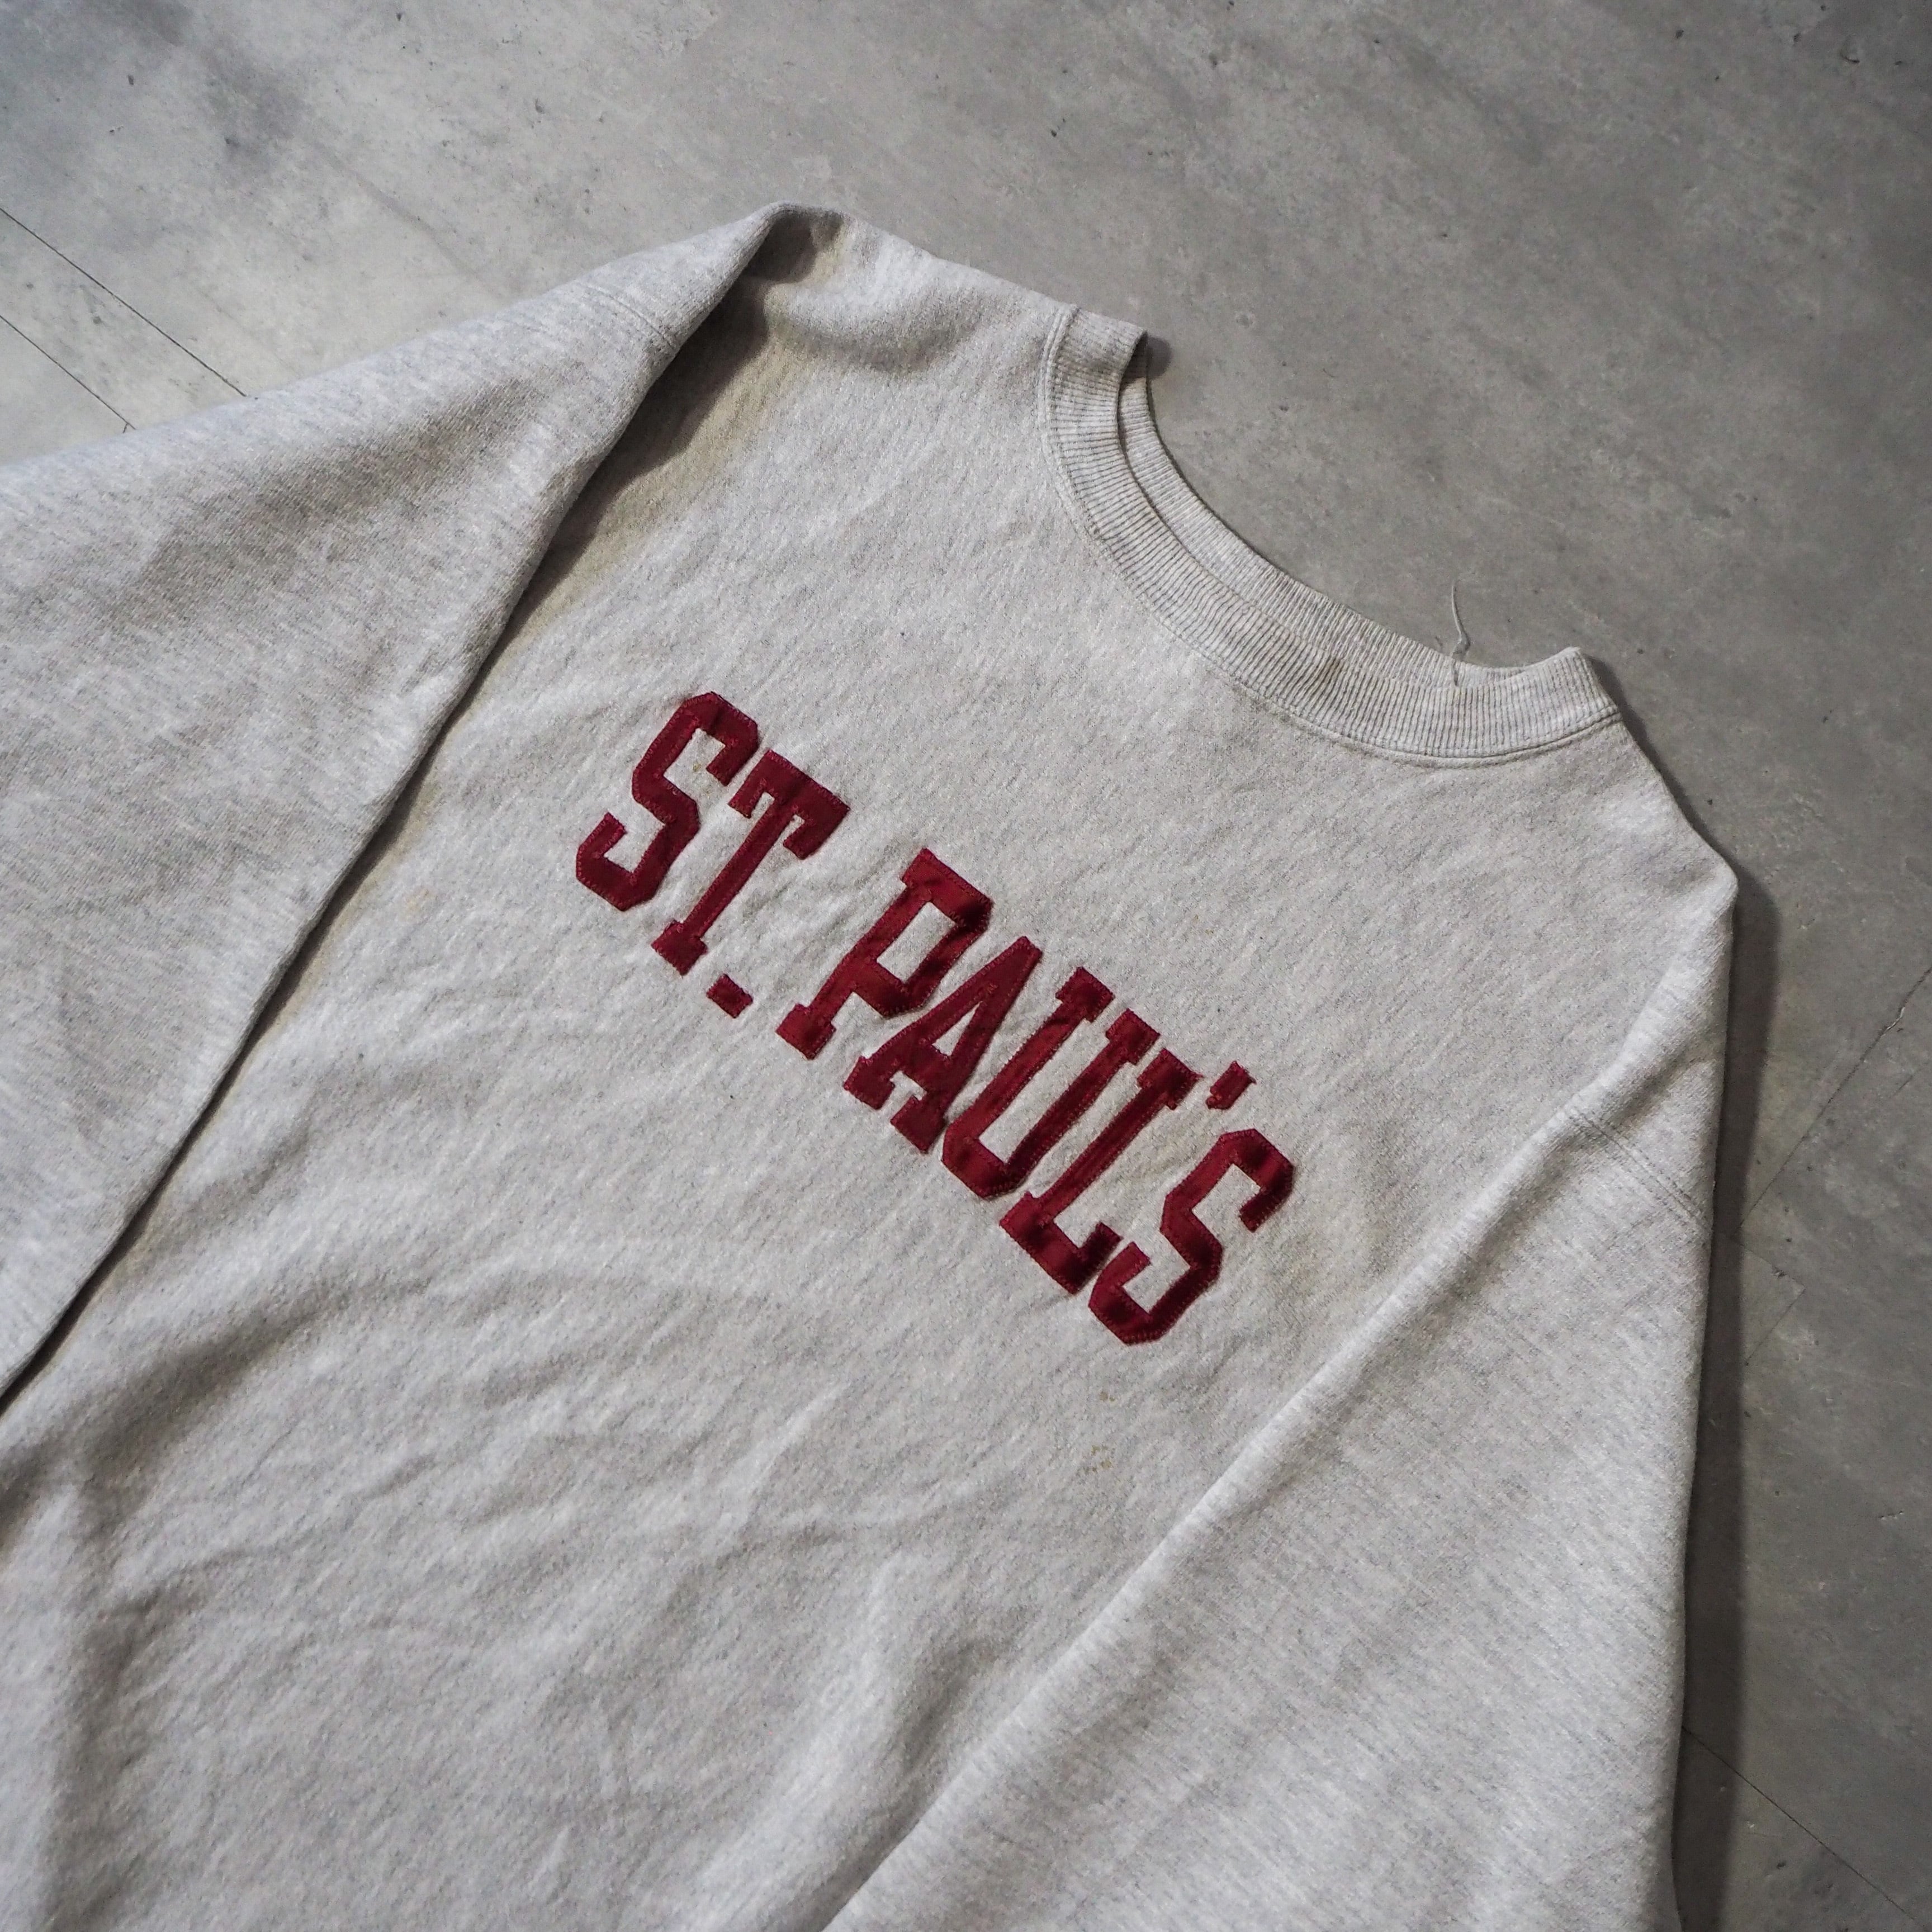 90s “champion” reverse weave 【ST. PAUL'S】 college logo made in